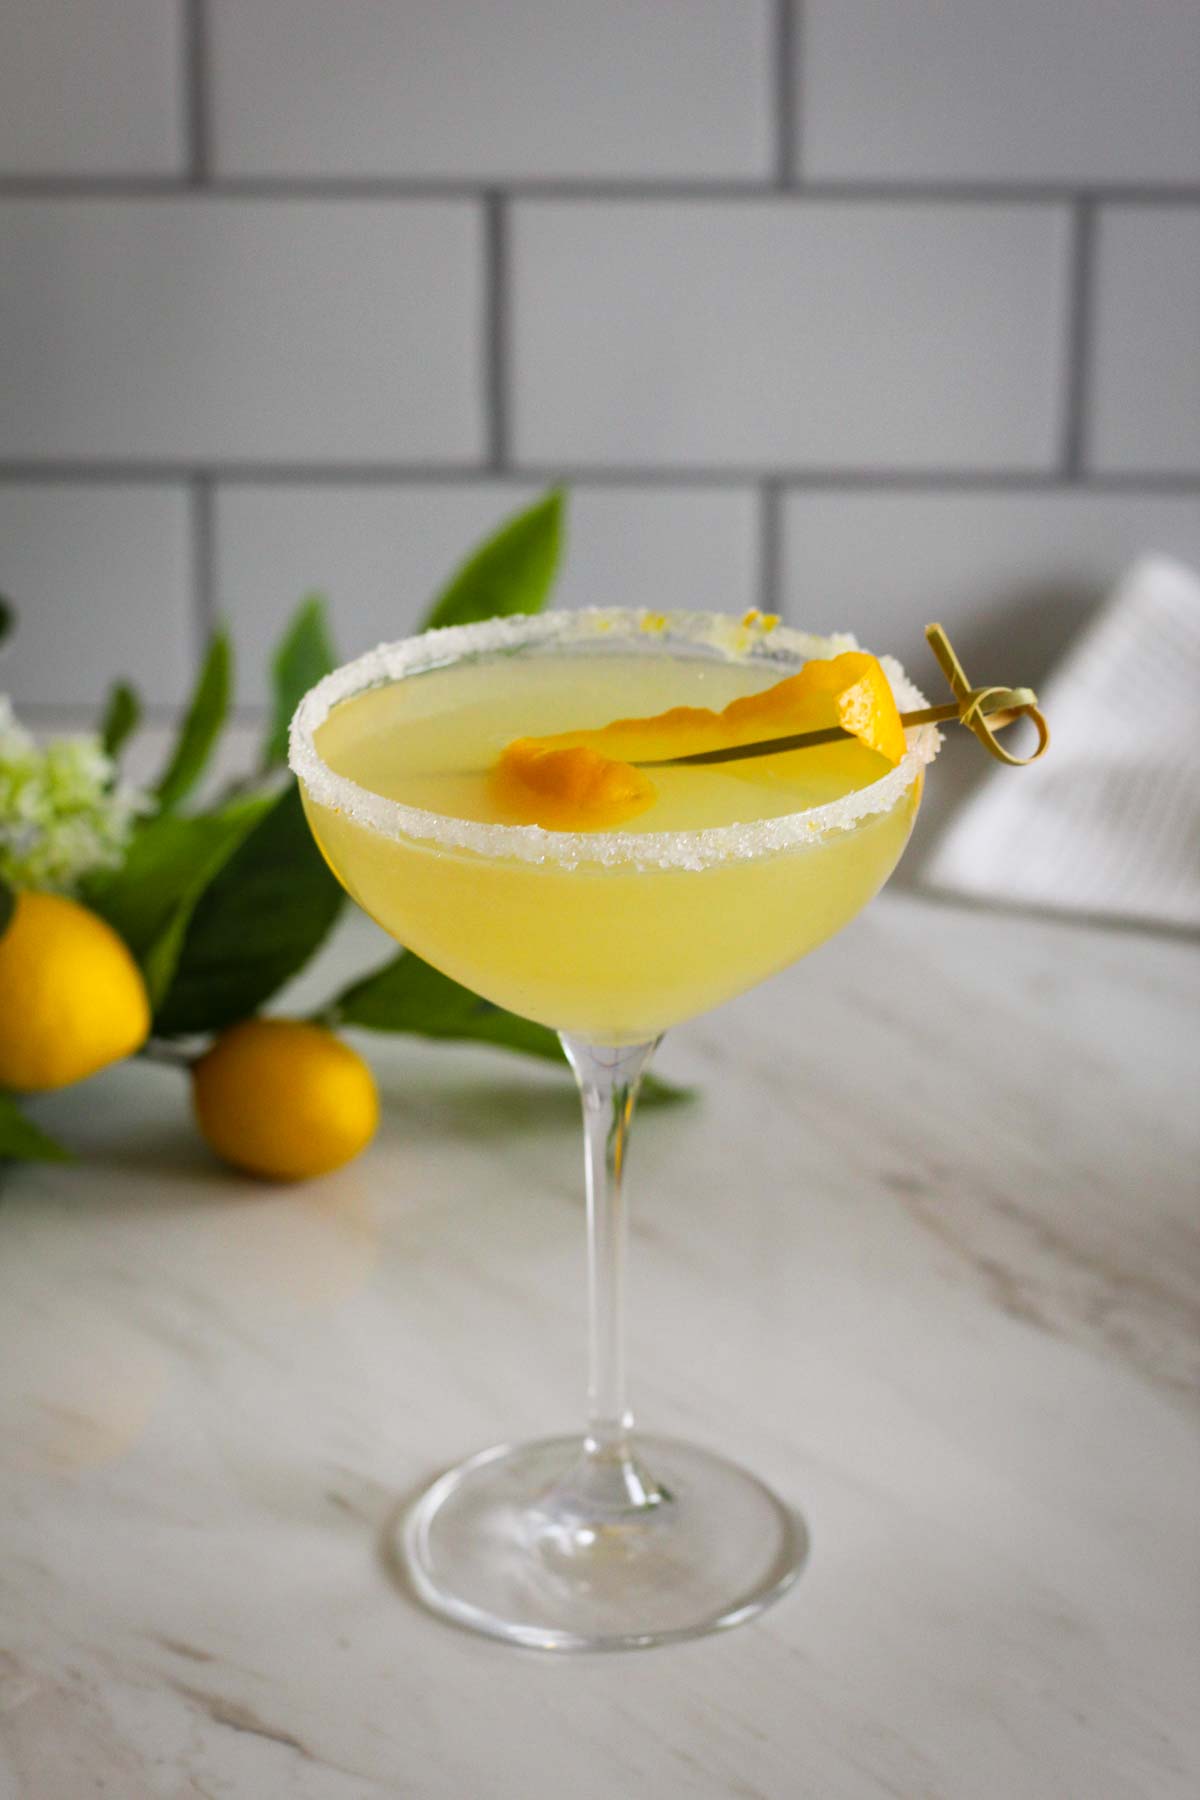 A coup cocktail glass showing a Meyer lemon drop with a peel garnish and more lemons in the background